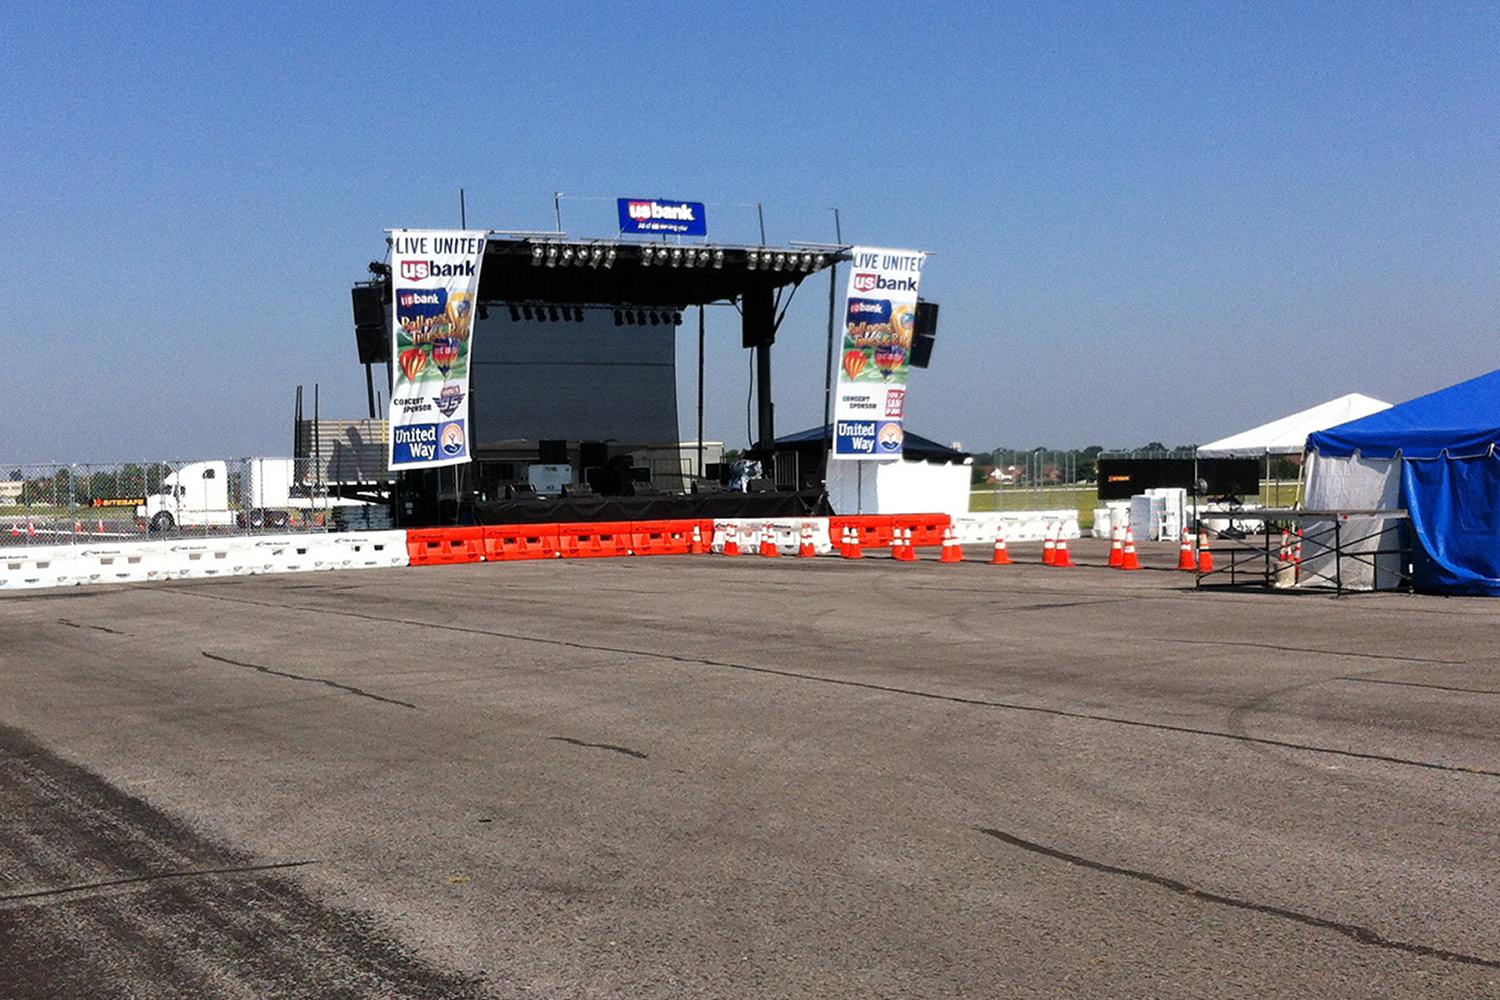 Event Safety Barriers in place at event